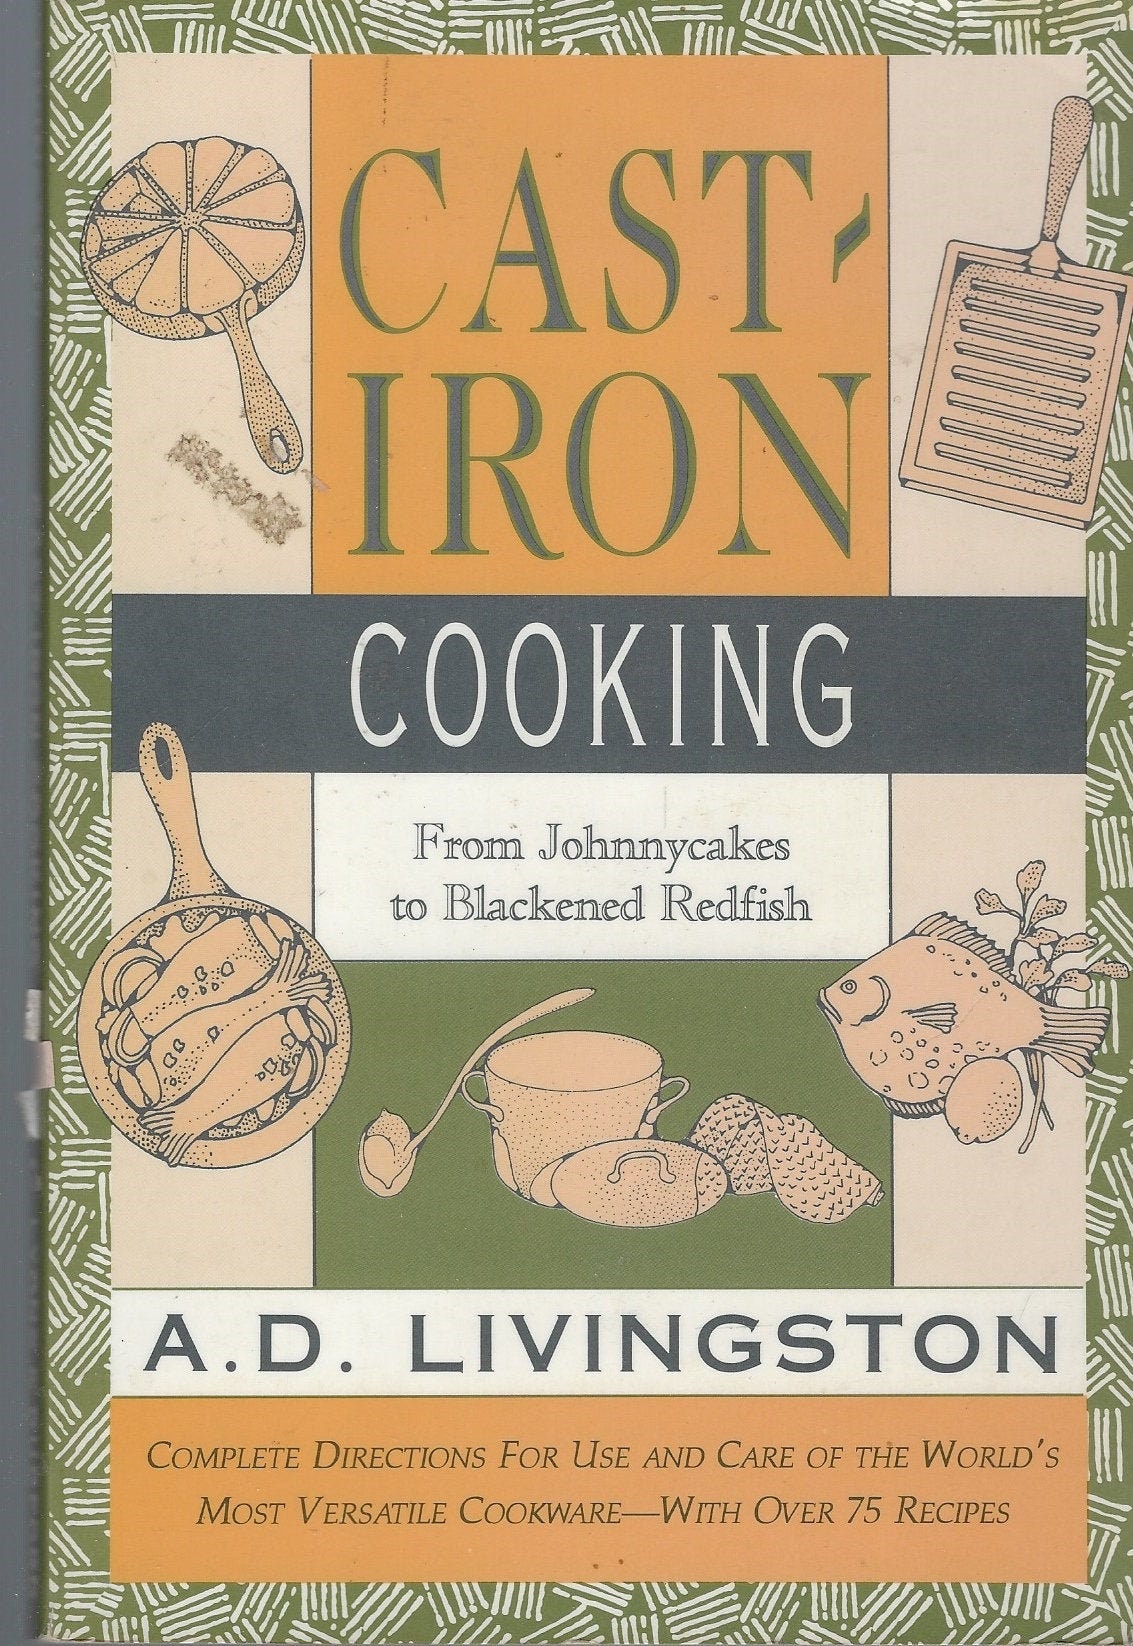 Cast Iron Cooking From Johnnycakes To Blackened Redfish Cookbook Vintage 1991 By A D Livingston Rare Frying Pans & Dutch Oven Recipes Book